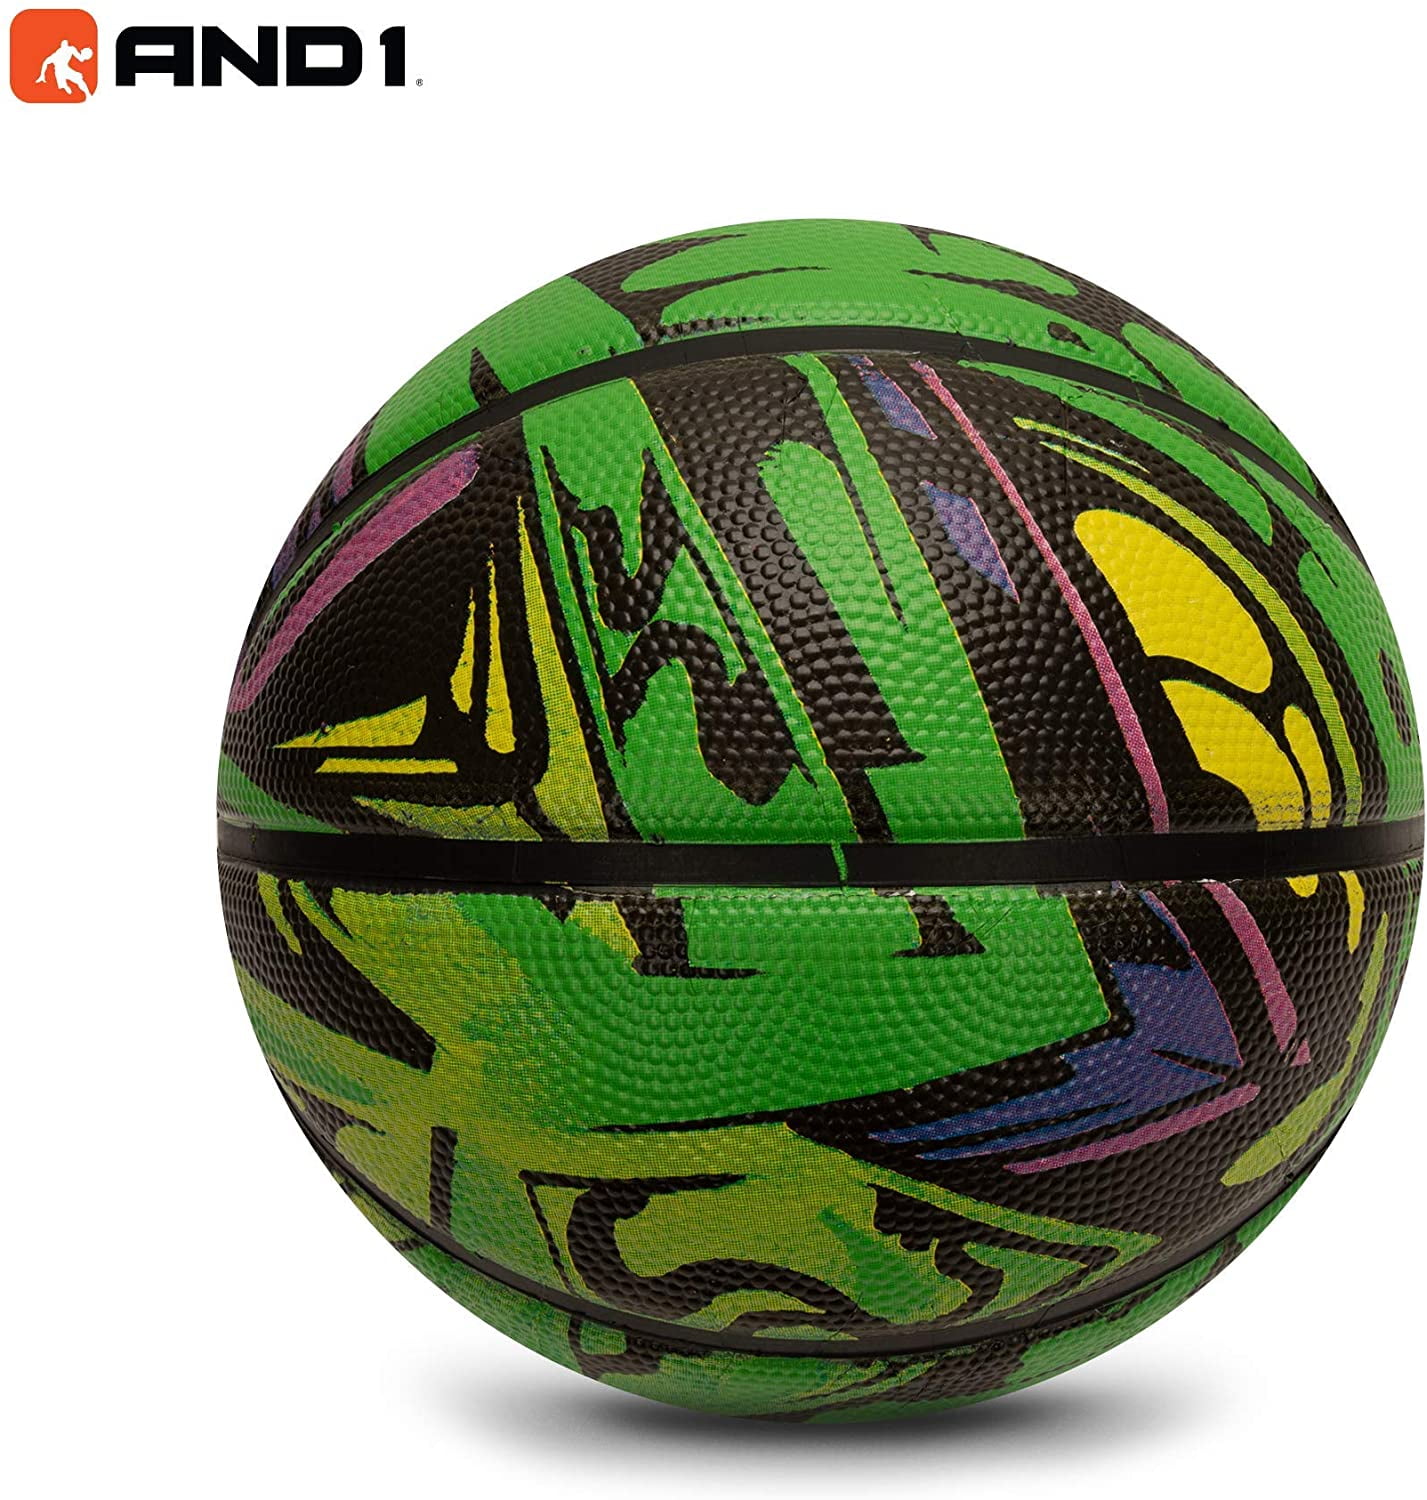 AND1 Supreme Grip Rubber Basketball and Pump, Green and Purple, 29.5/